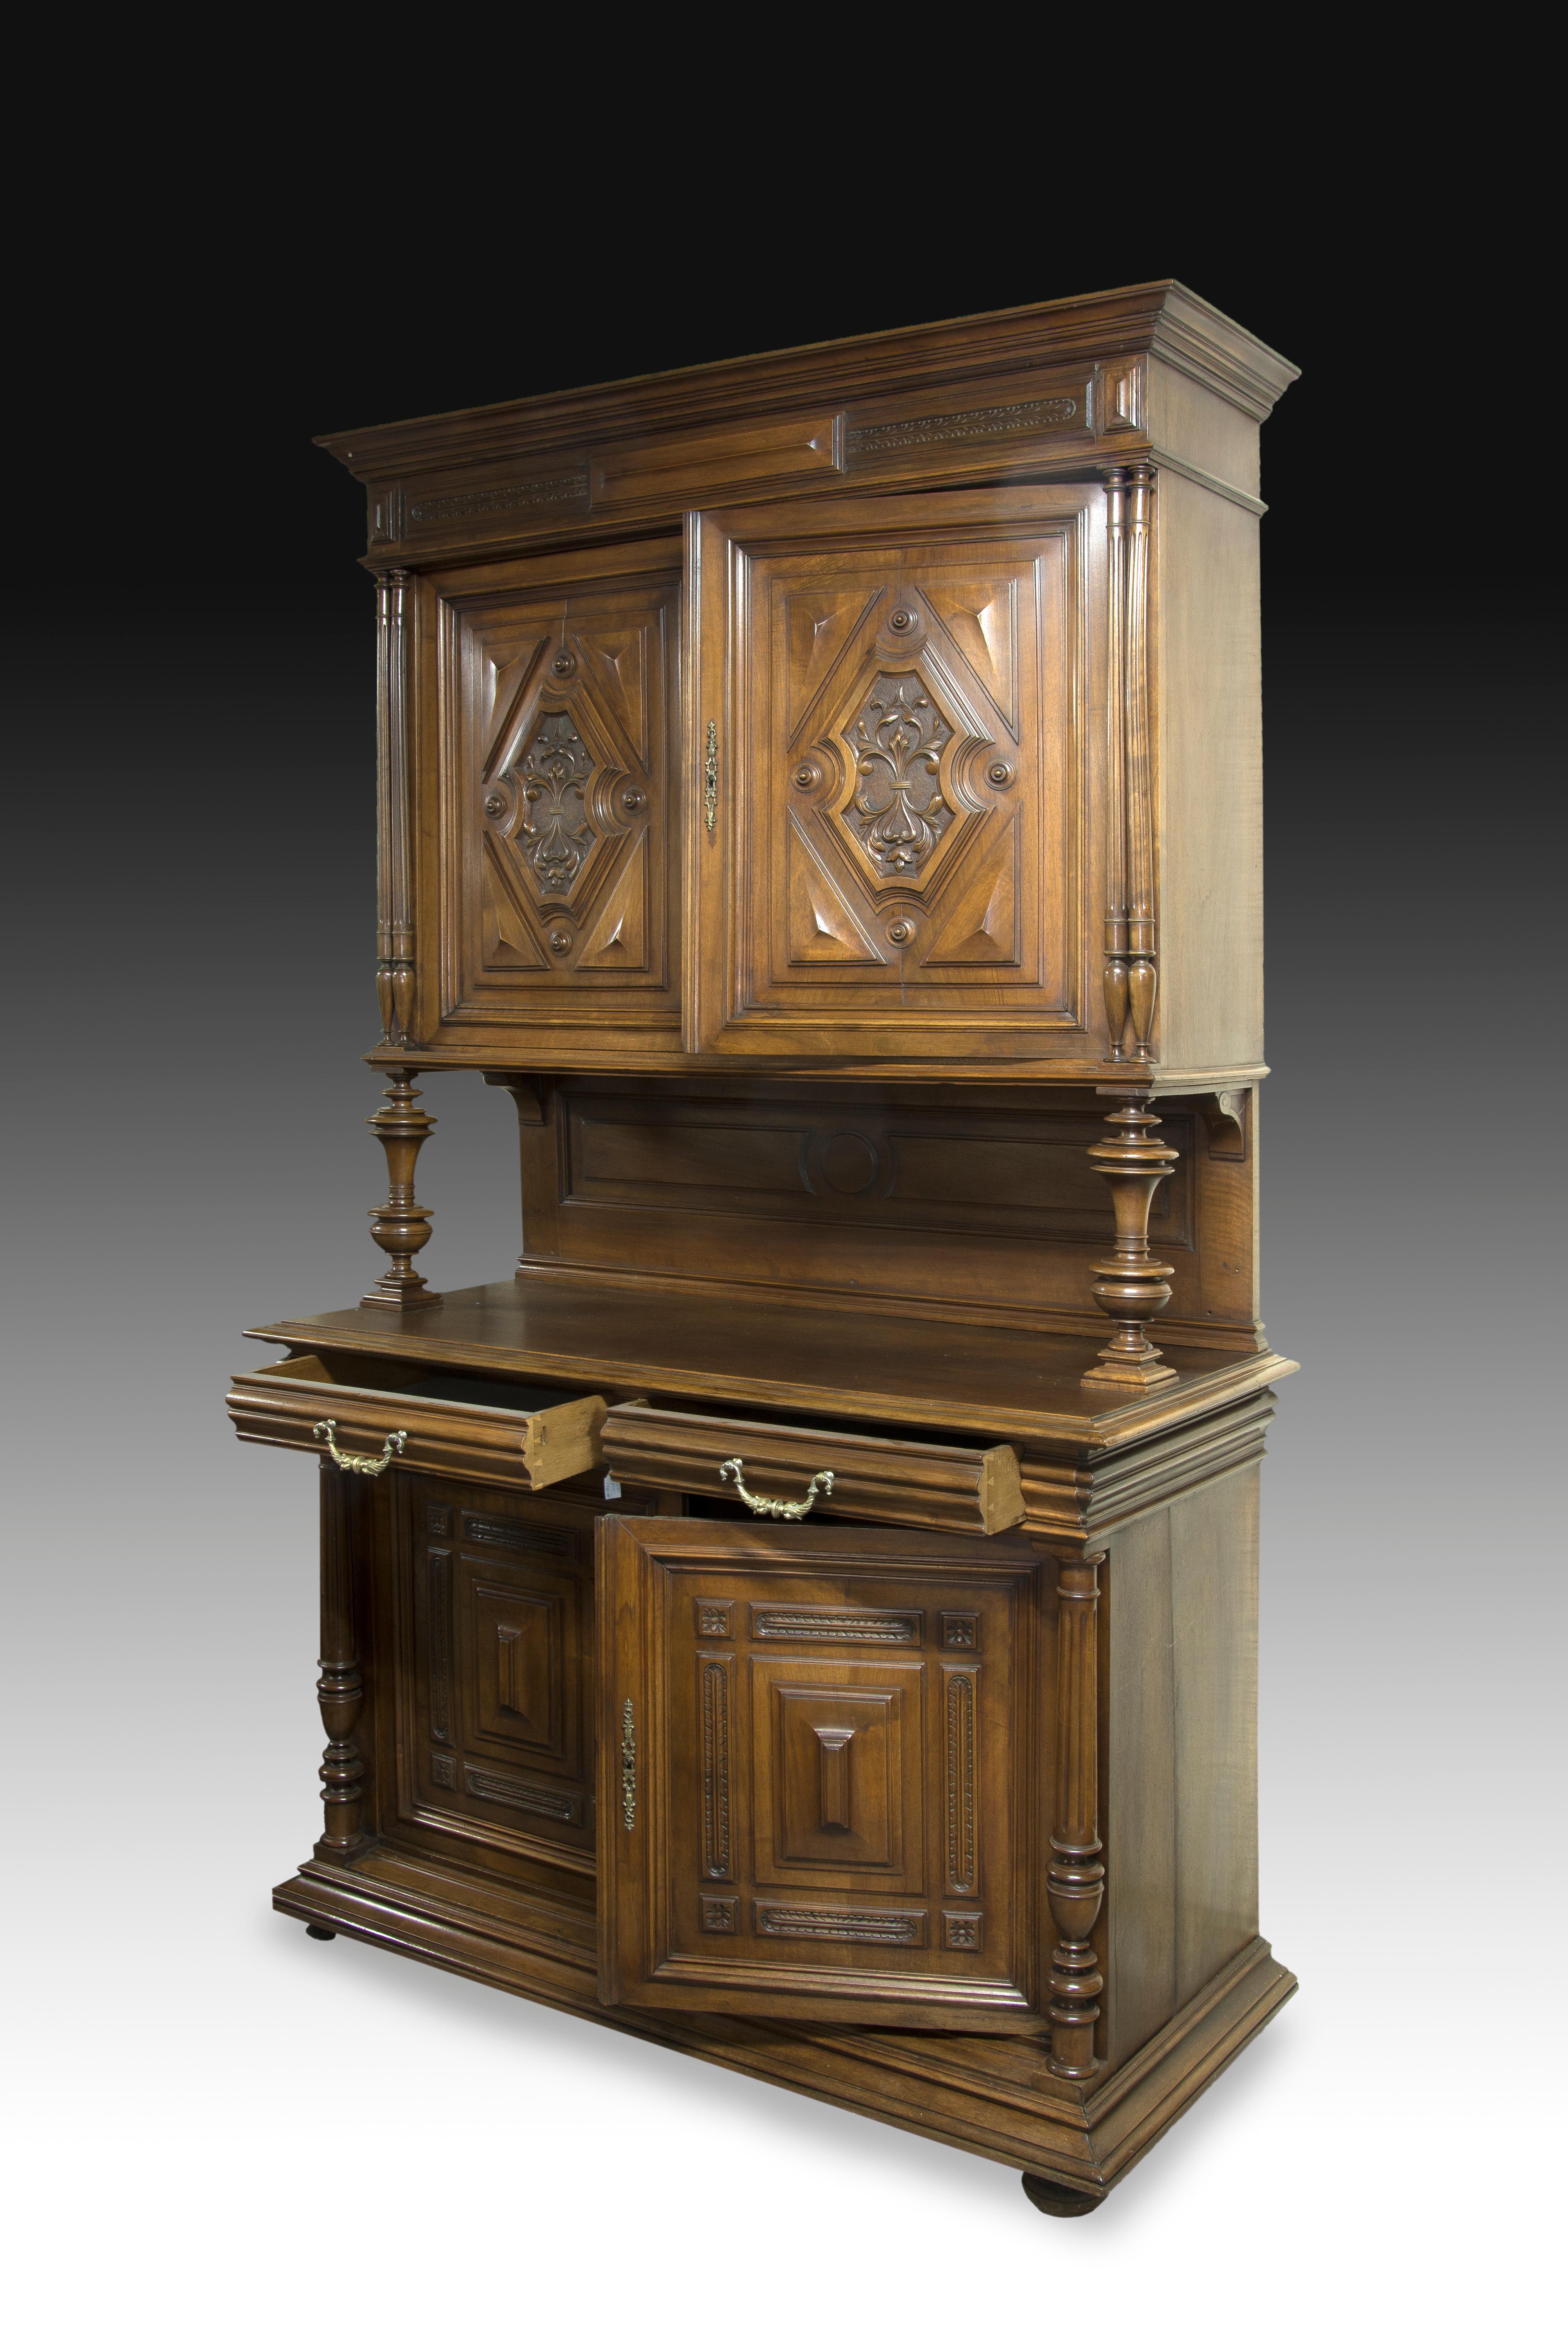 Walnut wood sideboard with two doors on the top decorated with reliefs (rhombuses, triangles panels, symmetrical vegetal composition, etc.), a space in the central area with two vase-shapped pieces and with discs on the sides , and lower area with